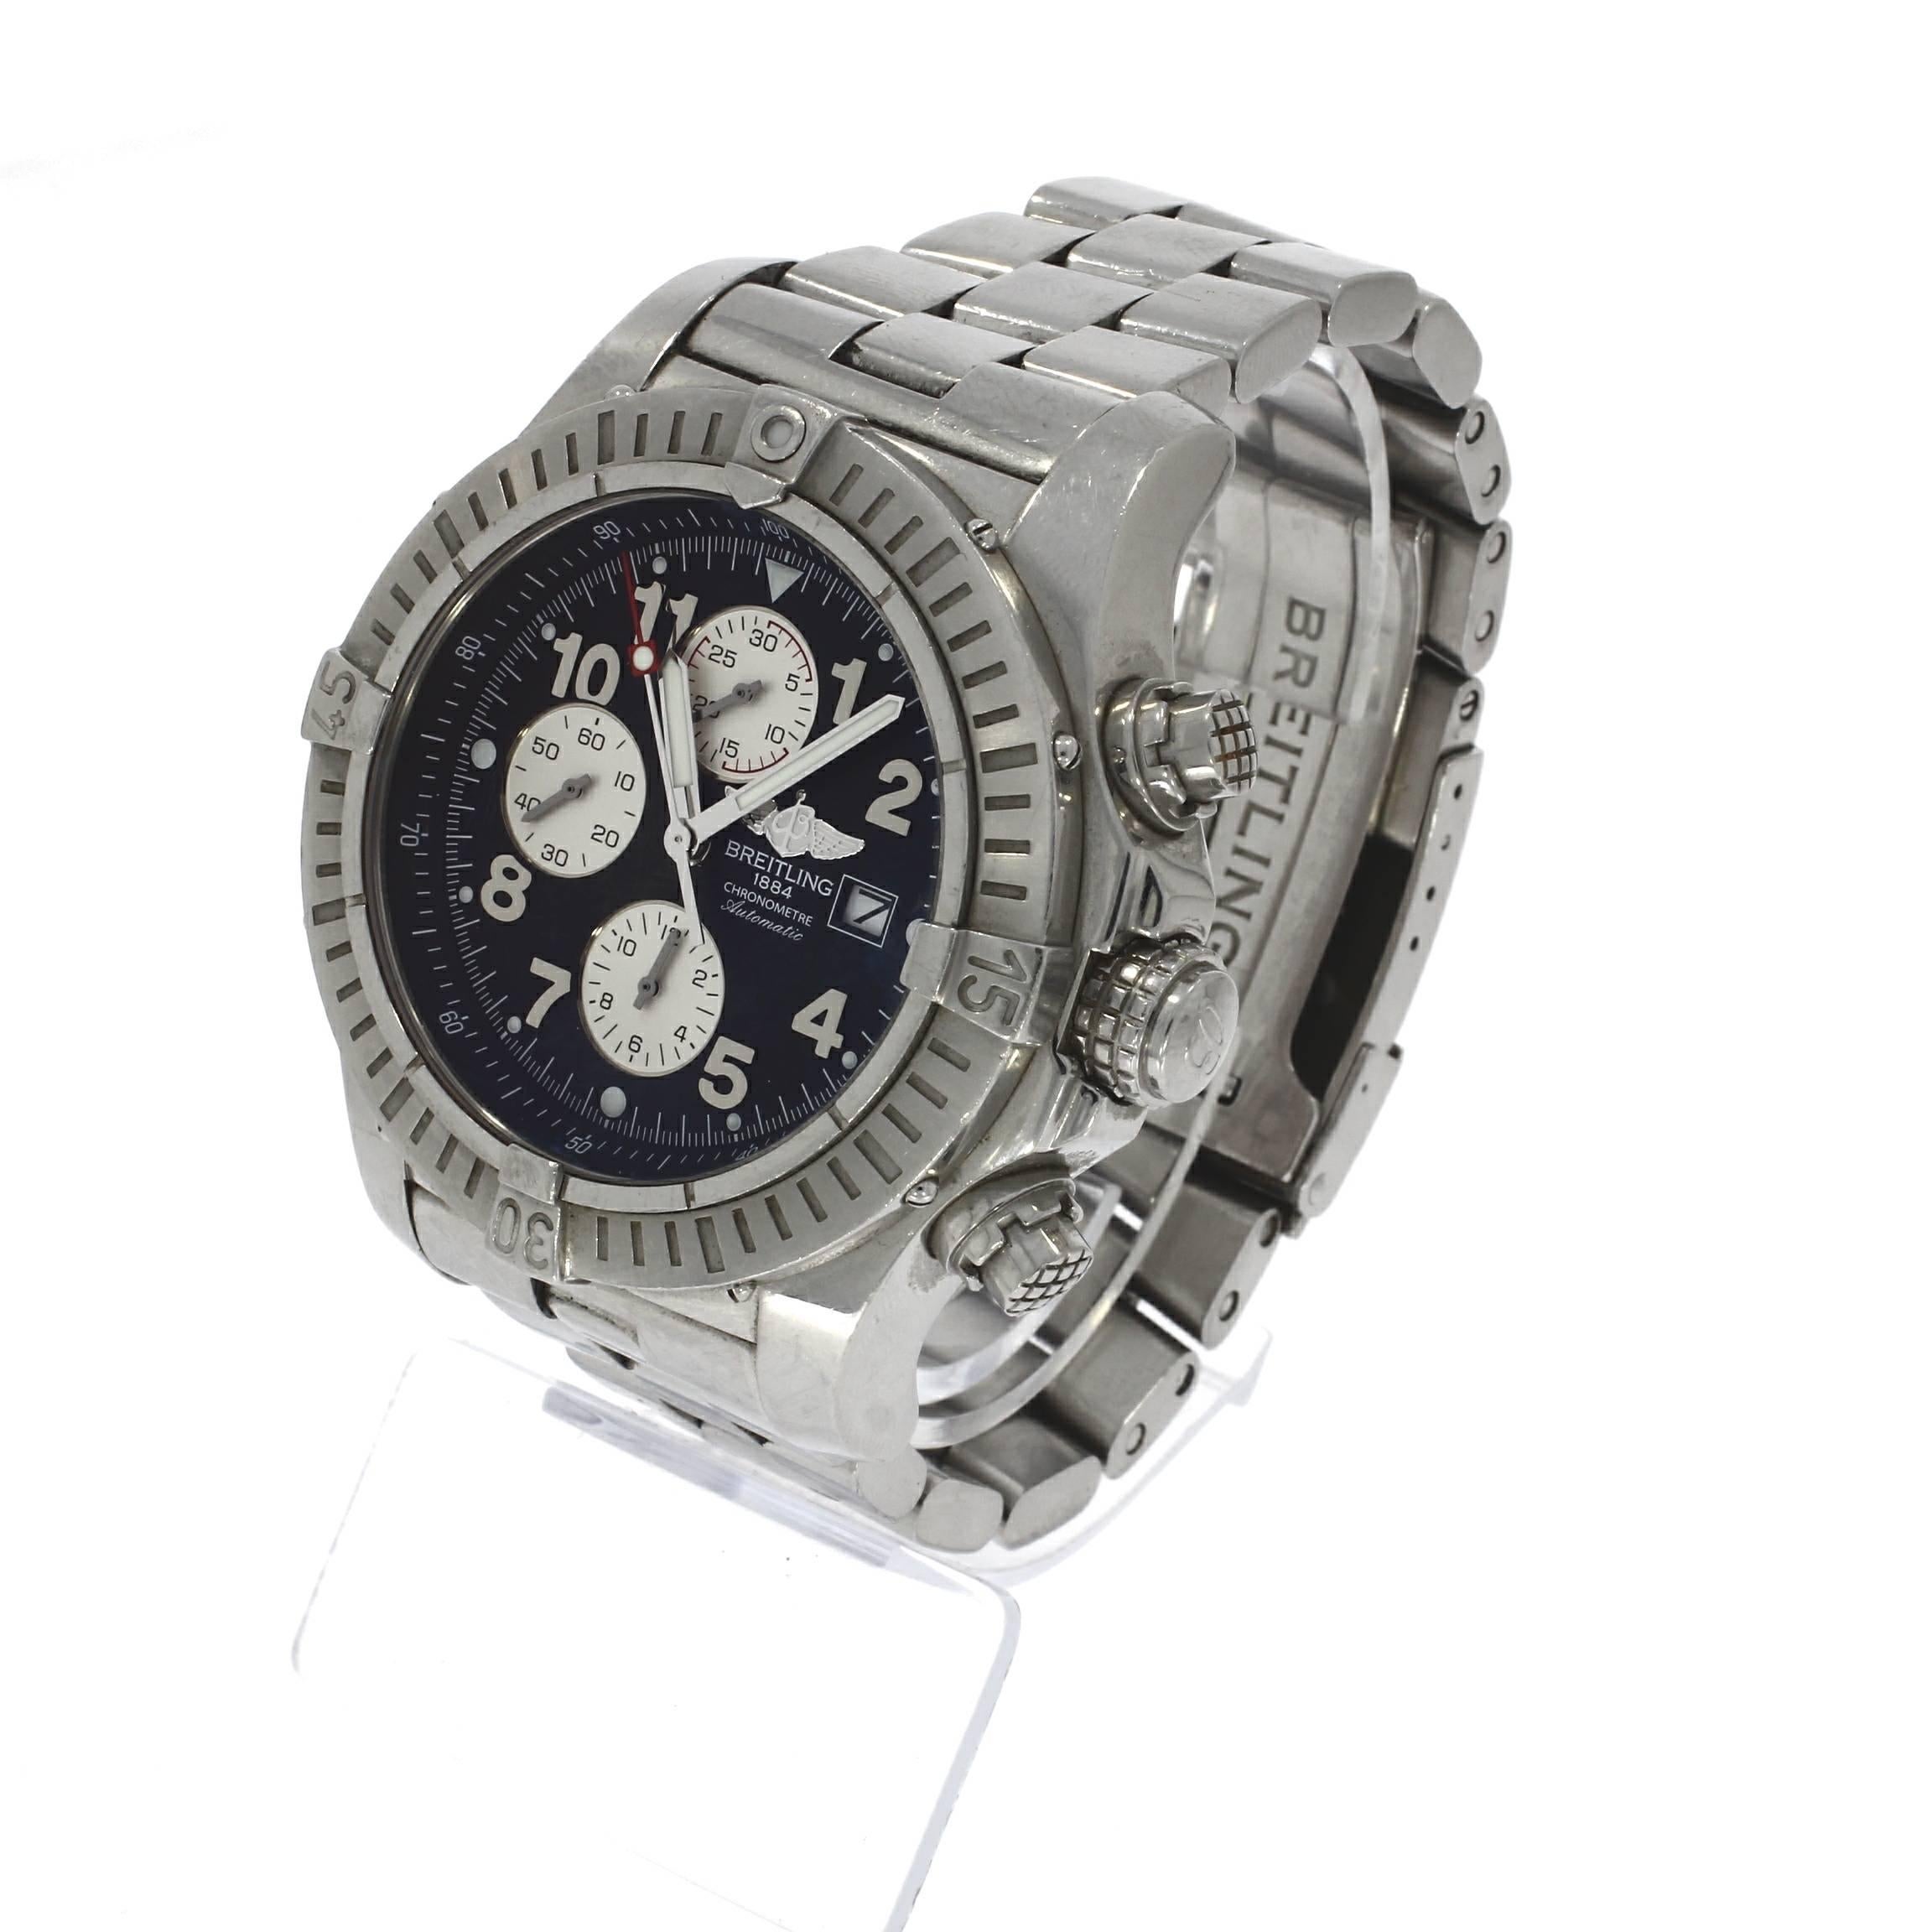 ​This is a pre-owned Breitling Super Avenger. It has a 48mm Steel Case, a Black dial, a Steel signed bracelet, and is powered by an automatic movement. Circa 2006. The case has a serial 2188***

The Breitling Super Avenger is one of Breitling’s most